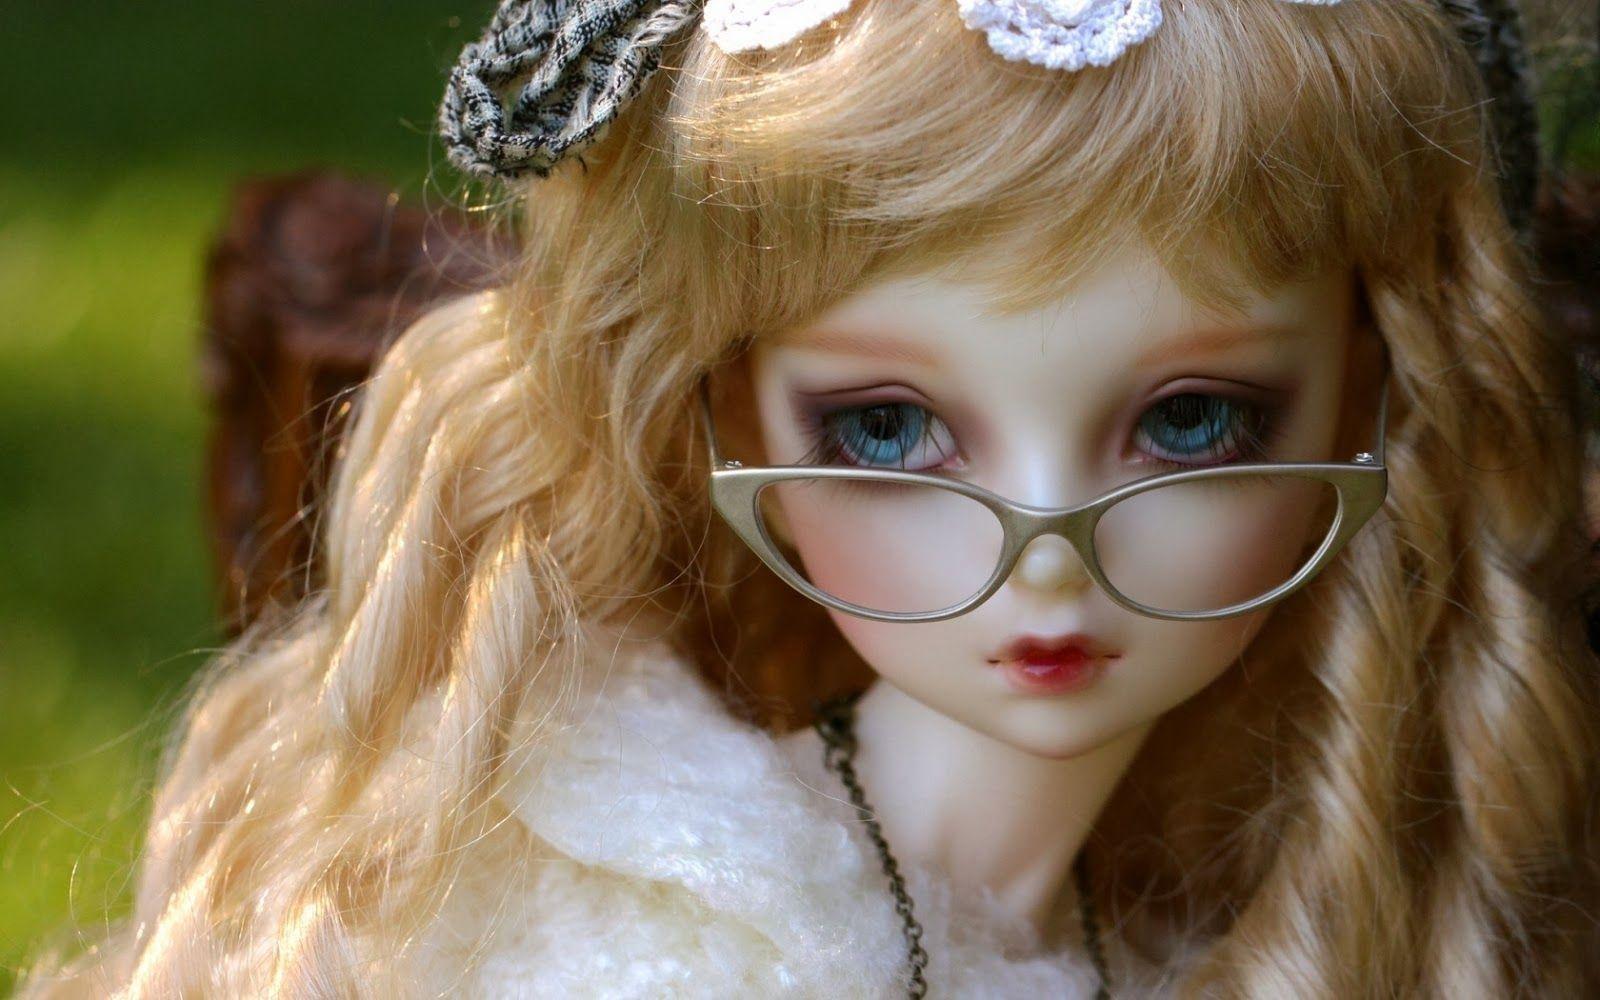 Cute Dolls Wallpaper For Facebook HD. Fashion Collections 2015